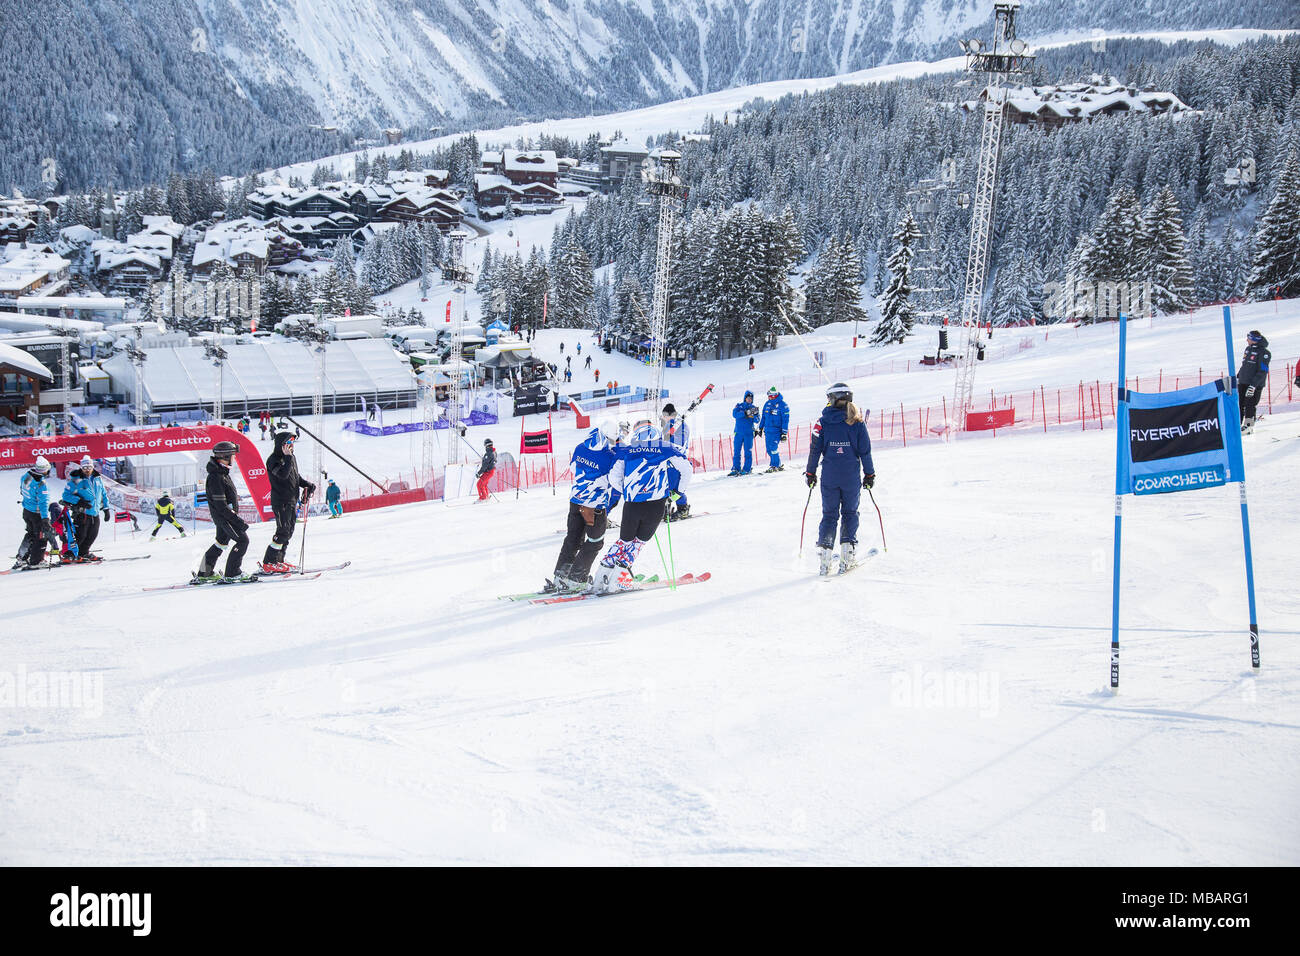 A view over Courchevel 1850 during the course inspection of the Audi Fis Alpine Ski World Cup Courchevel 2017 Ladies GS Women's Giant Slalom alpine sk Stock Photo